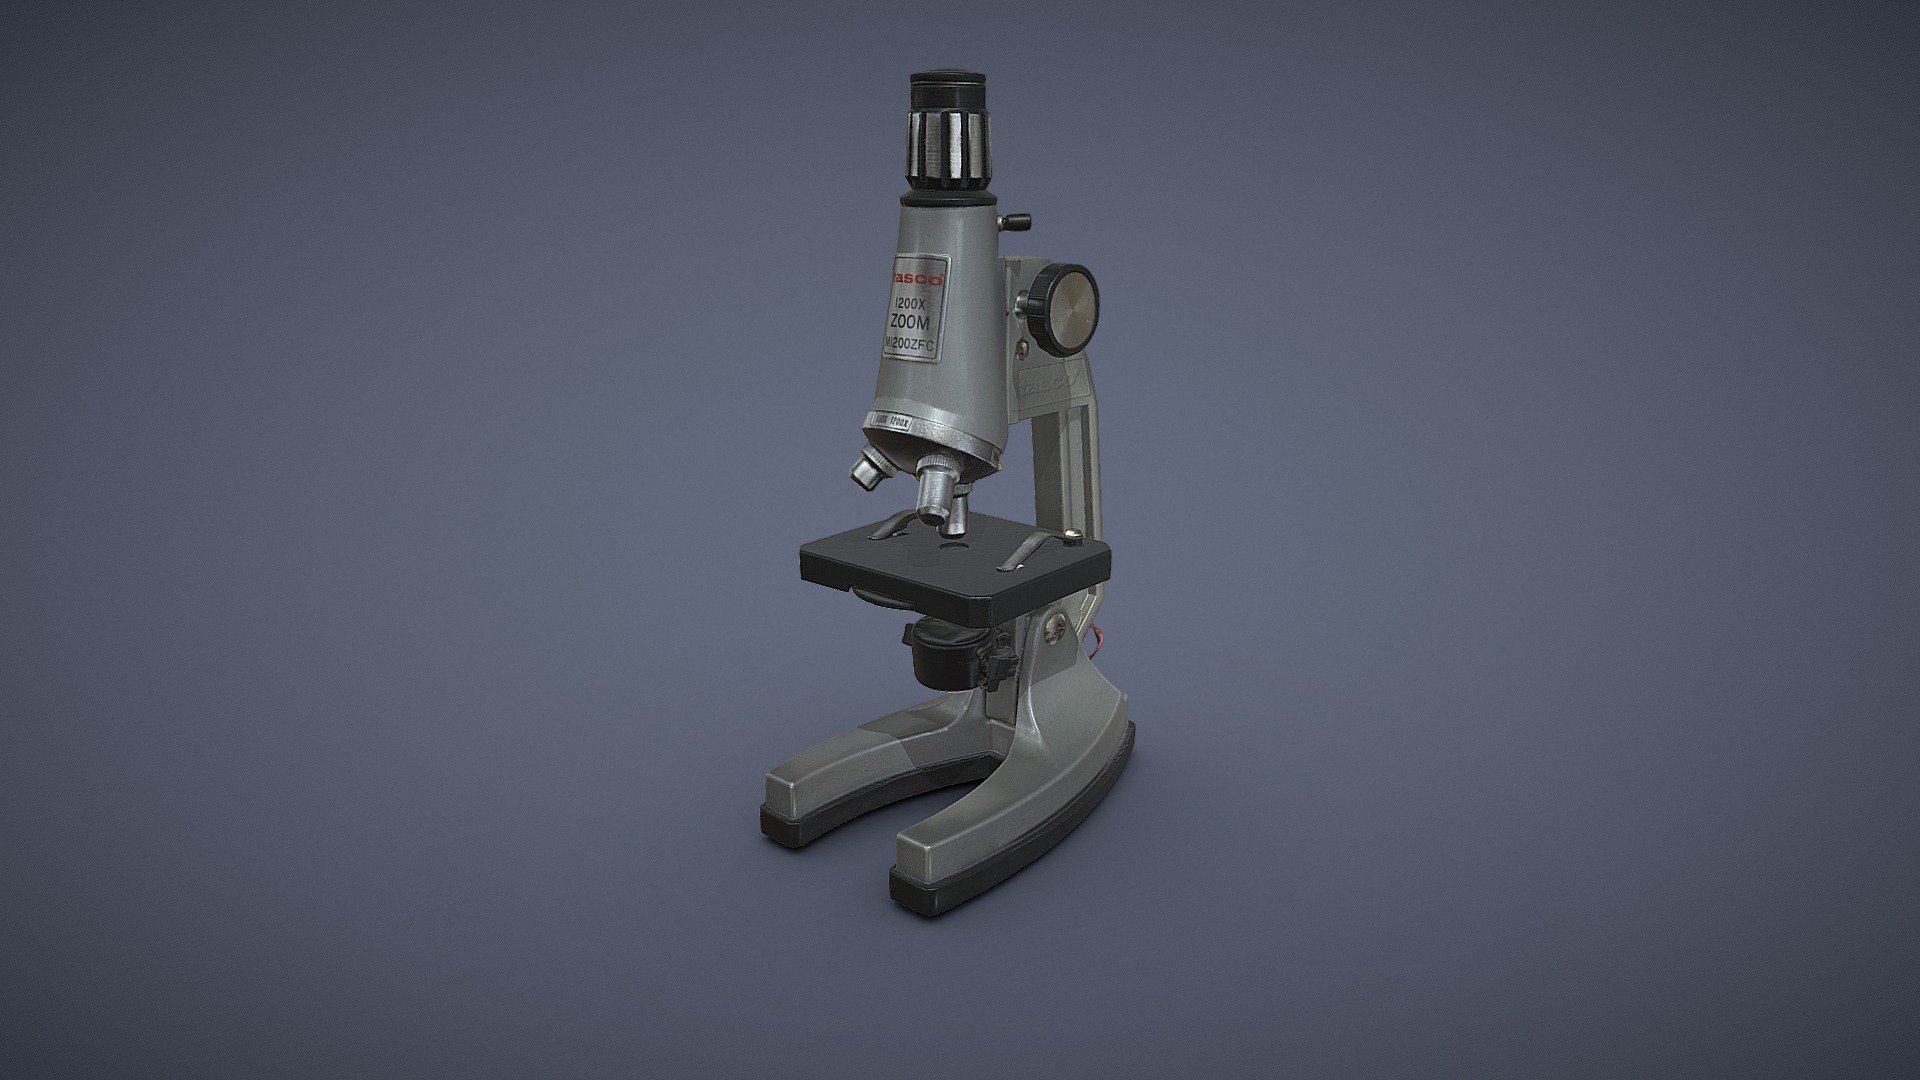 Full color scan high resolution of Microscope done with Artec SpaceSpider. Color mapping shows some flares, scan was done in light box, geometry looks really good 3d model